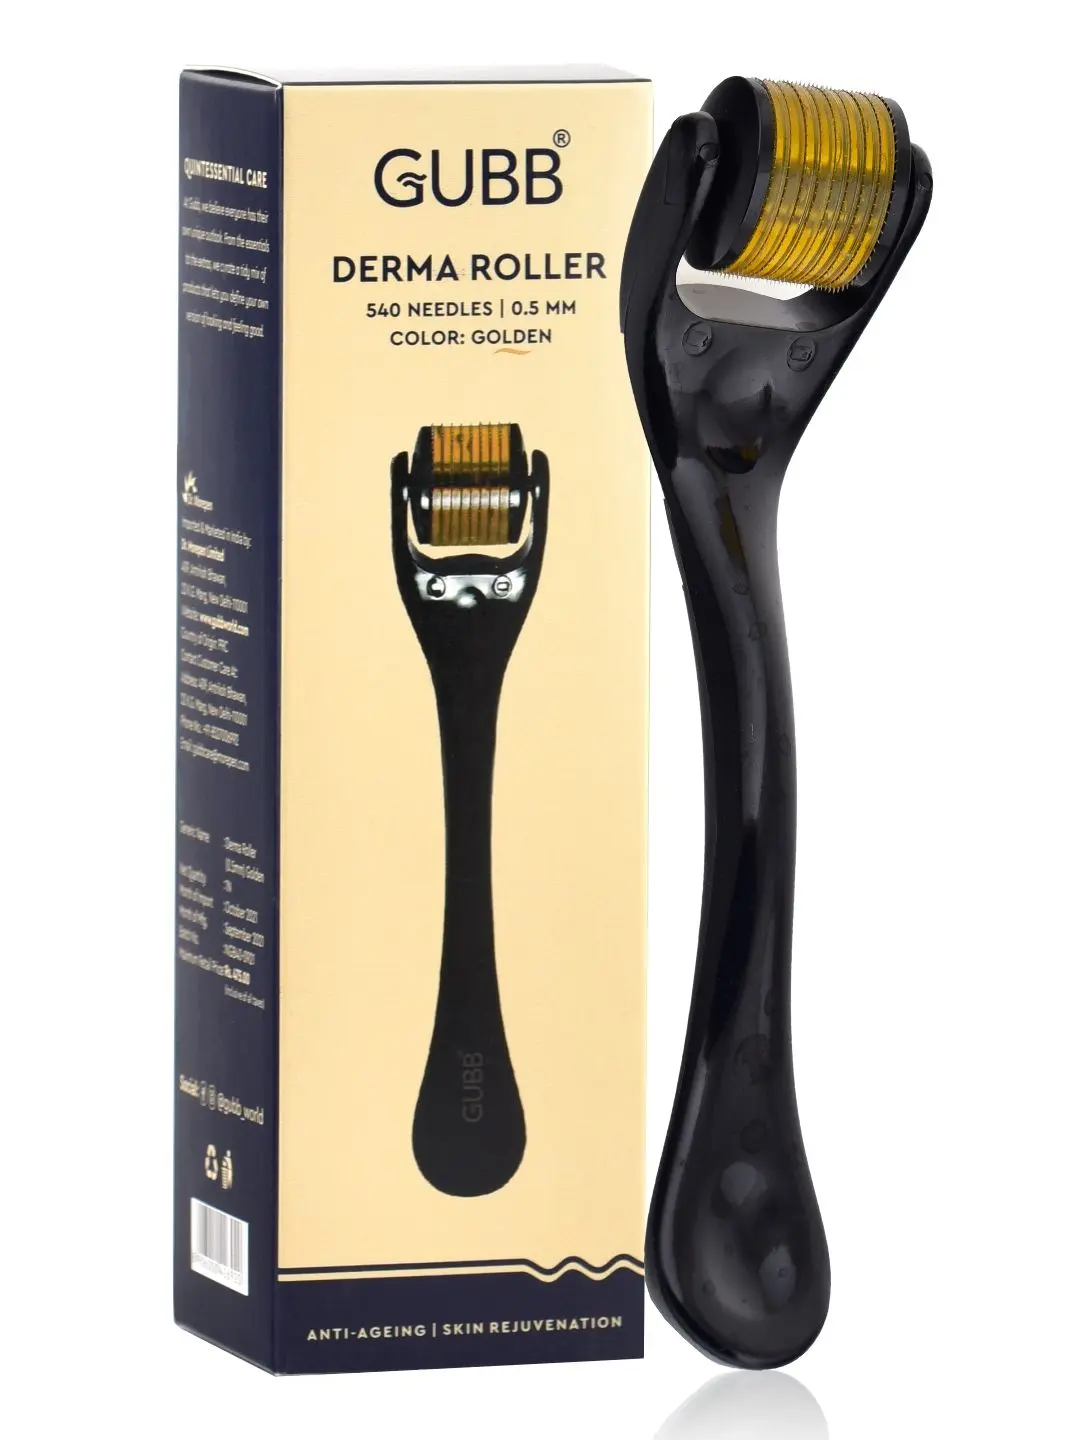 GUBB Derma Roller For Face And Hair Regrowth 0.5 mm Micro Needles Skin Treatment Of Scars, Anti Ageing, Wrinkles, Golden